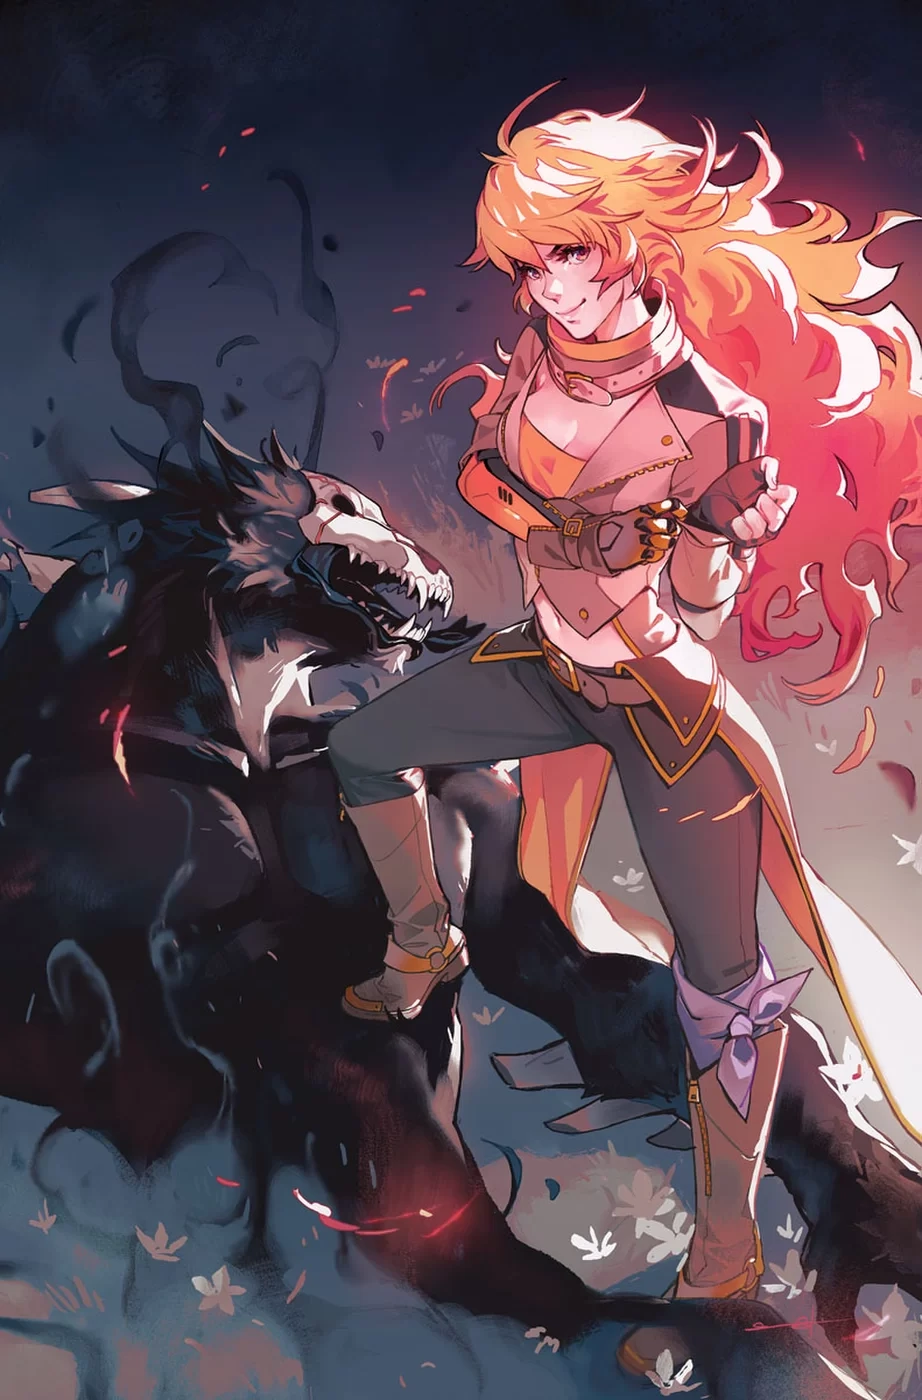 Yang stands triumphant over a Grimm on Sarah Stone's cover to RWBY Vol. 1 #4 "Yang, Part 2: Magic Words" (2020), DC